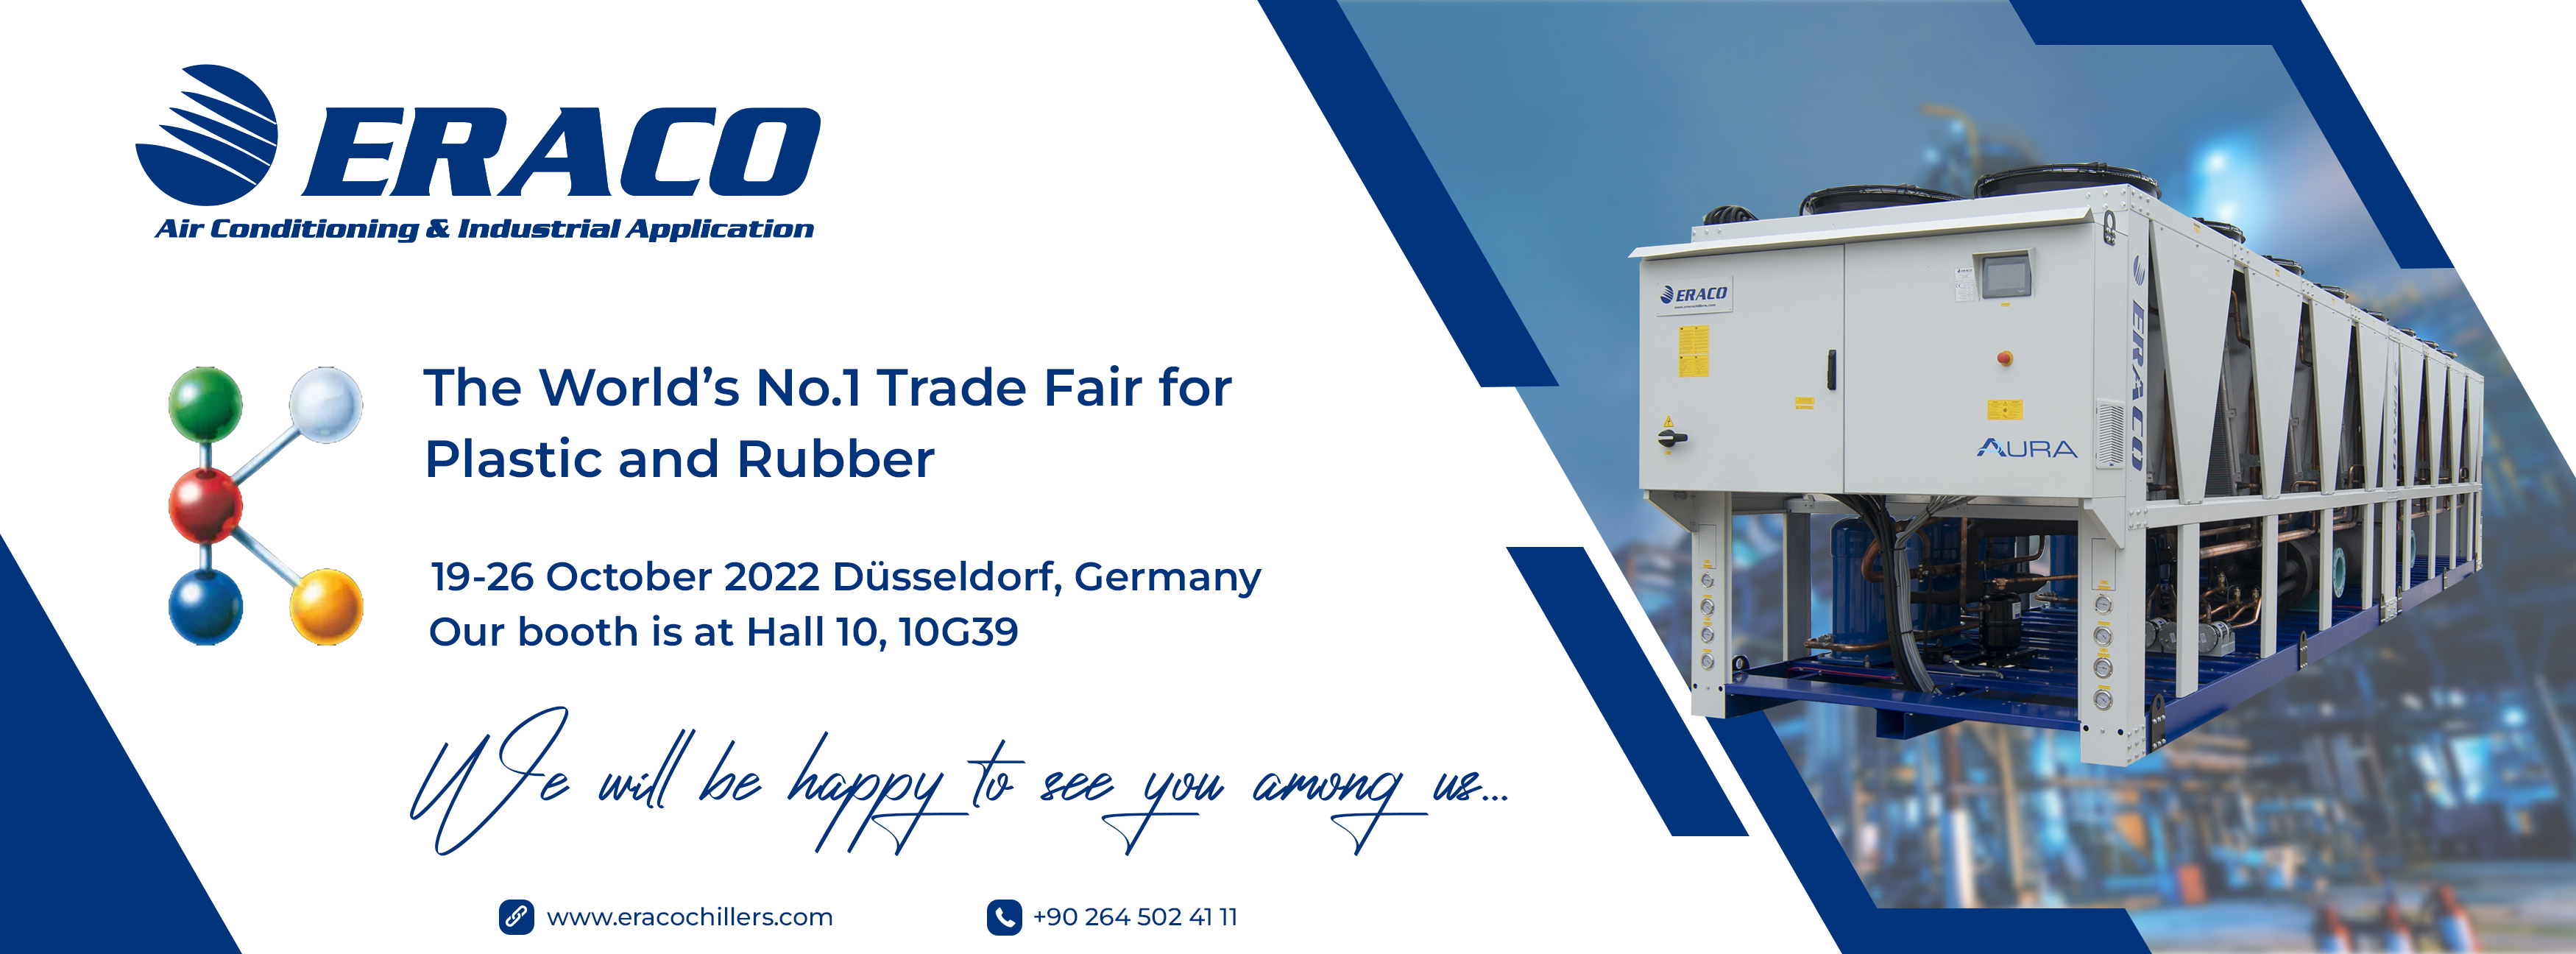 <p>We will be in K 2022 -- The World's No. 1 Trade Fair for Plastics and Rubber, between 19-26 October 2022 in Dusseldorf, Germany. Our booth is at Hall 10, 10G39.</p>